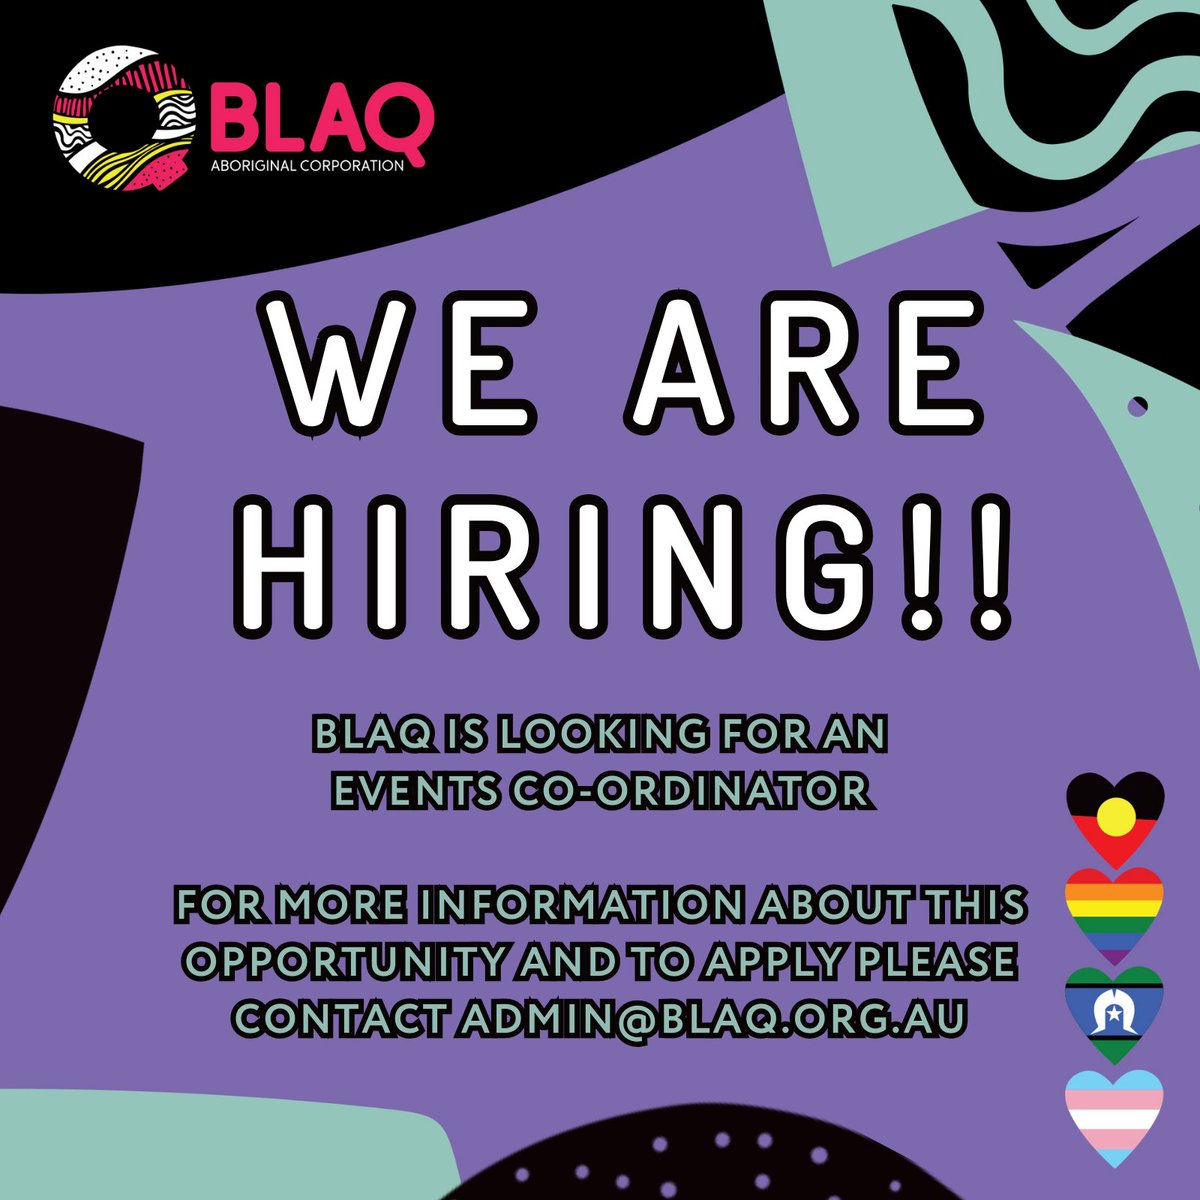 Events expert? Social superstar? Gala guru? BlaQ is looking for an Events Co-ordinator. Join the growing team at BlaQ as an Events Co-ordinator. Read the PD below and apply via email to admin@blaq.org.au blaq.org.au/employment/